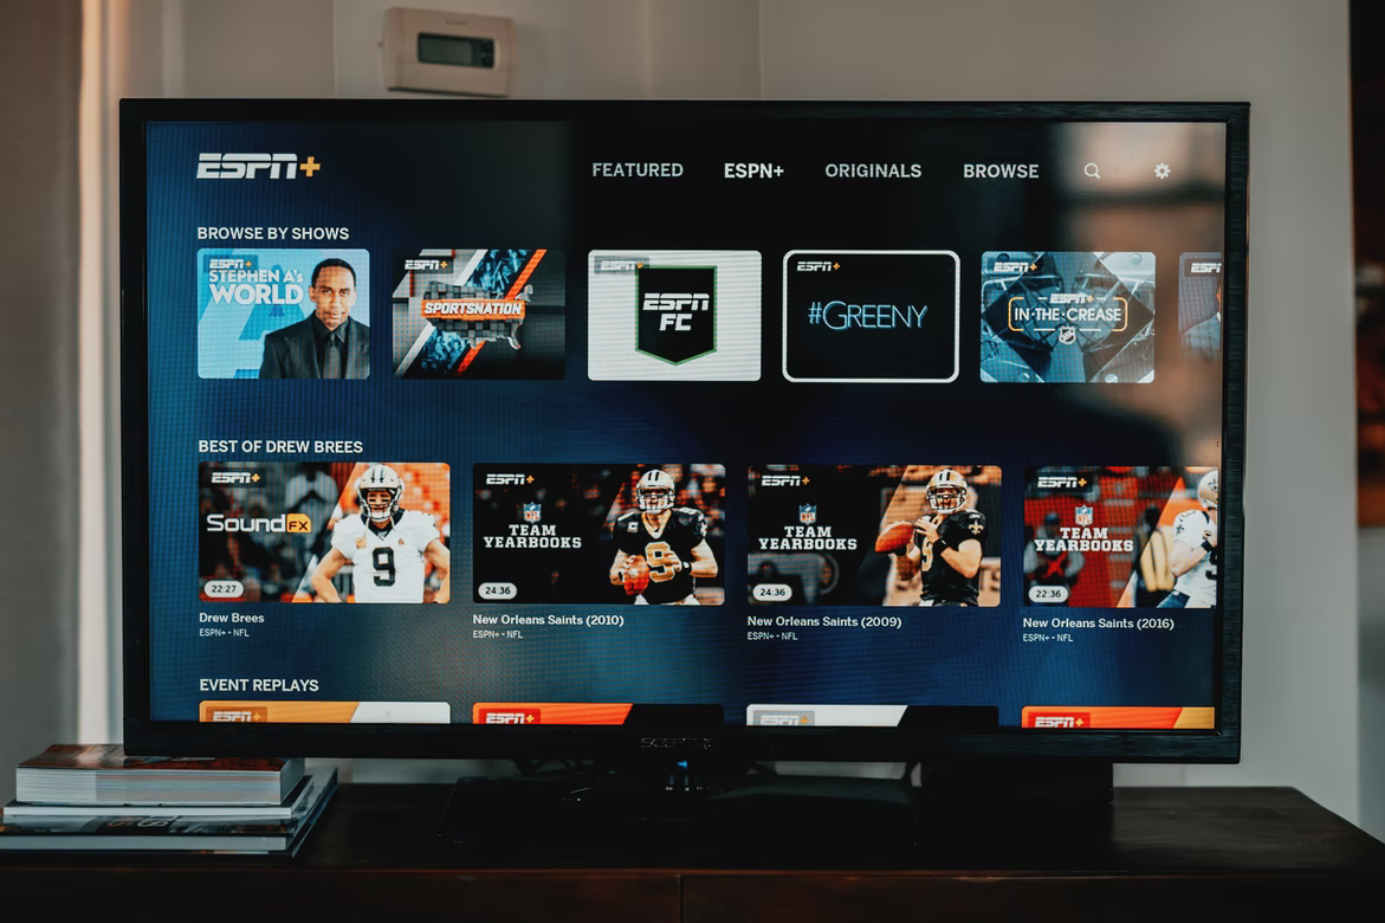 How to add ESPN+ to LG TV